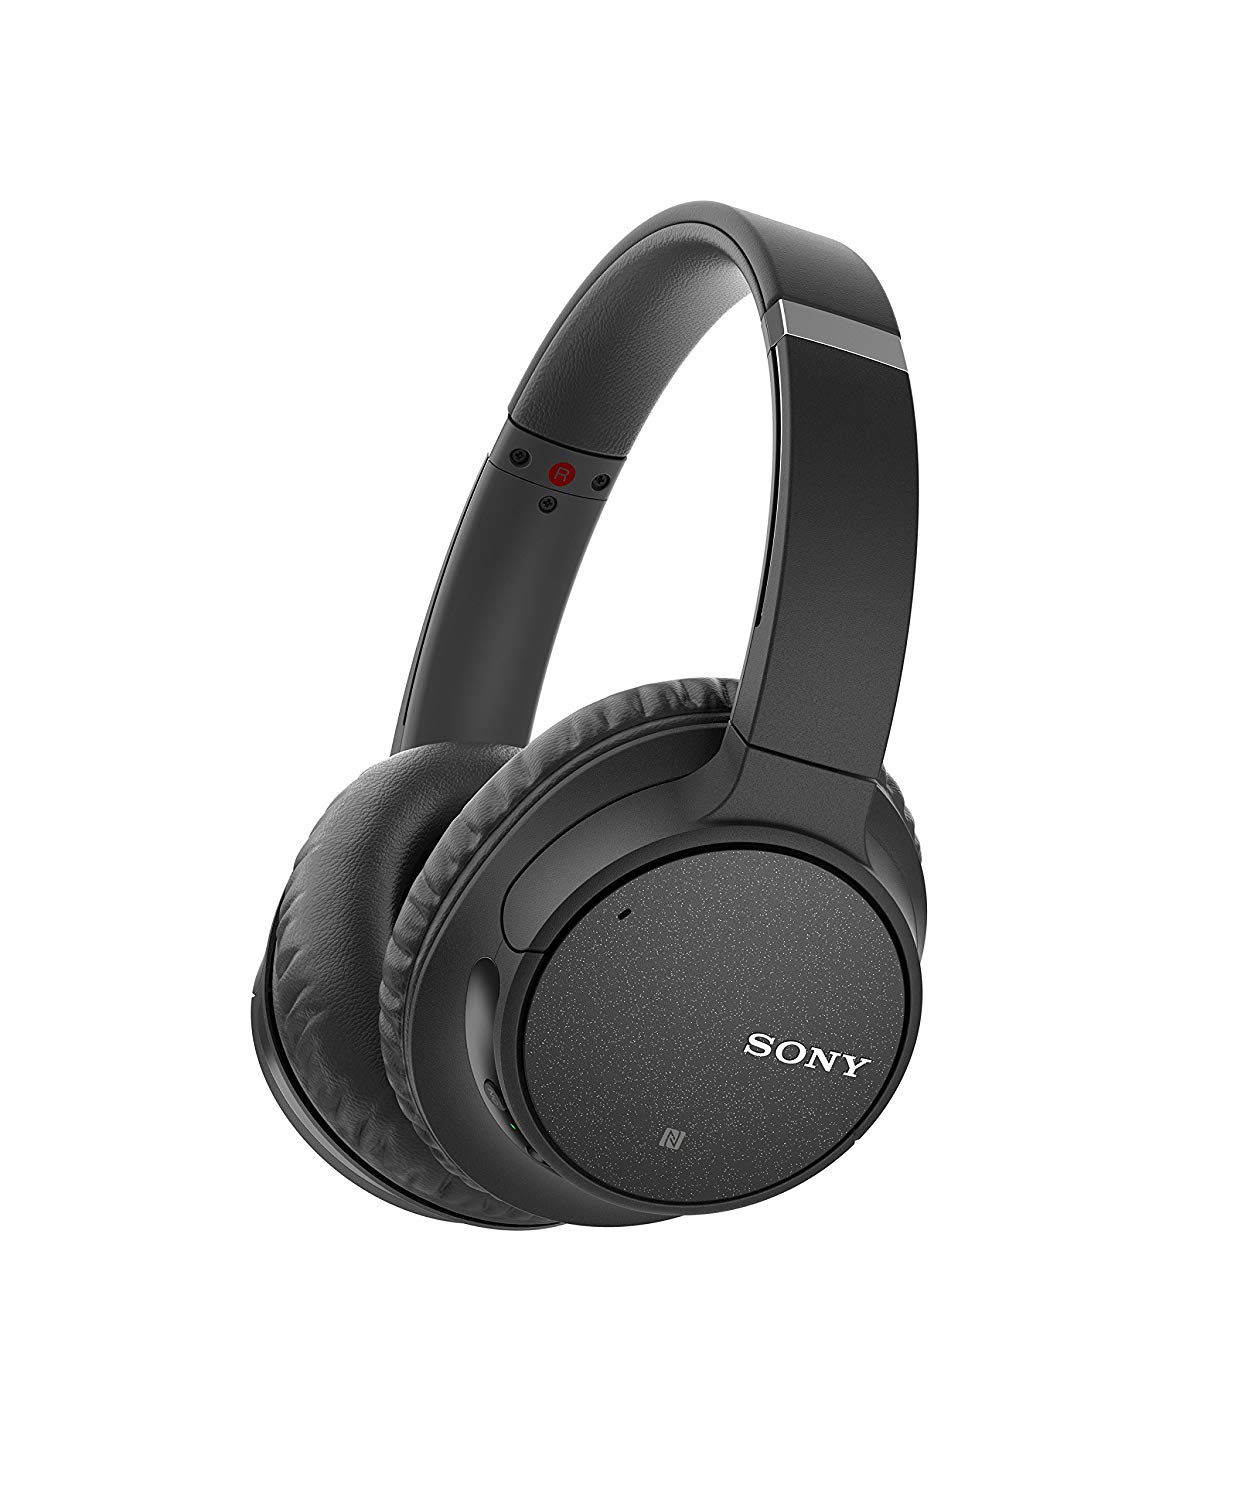 Sony Wireless Noise Canceling Headphones With Alexa On Sale for 55% Off [Deal]